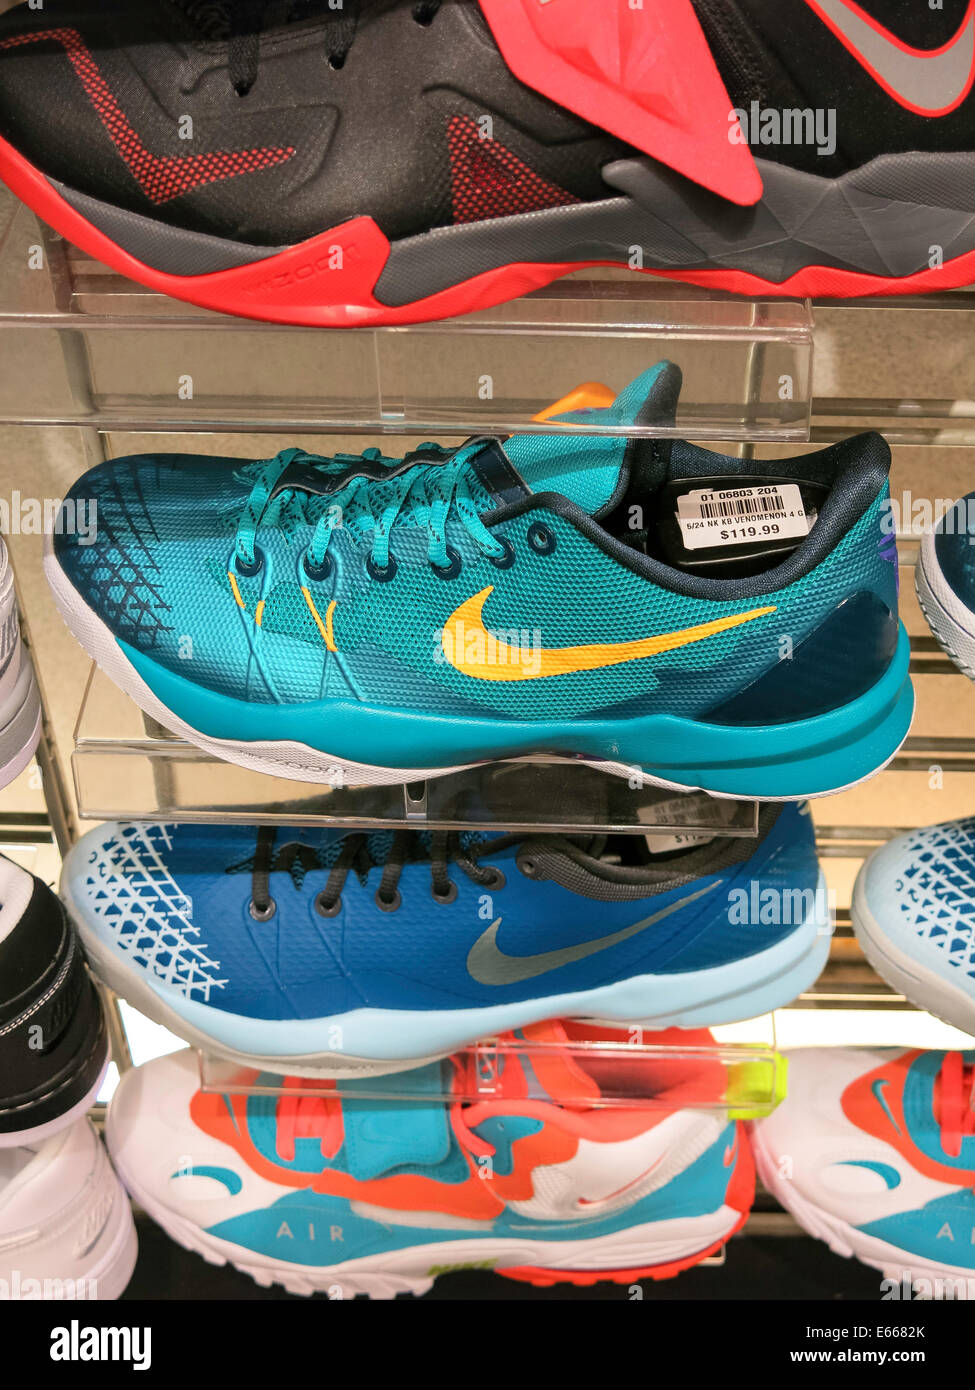 Nike Athletic Schuhe mit Swoosh Logo, Champs Sports in der Holiday Village Mall, Great Falls, MT, USA Stockfoto